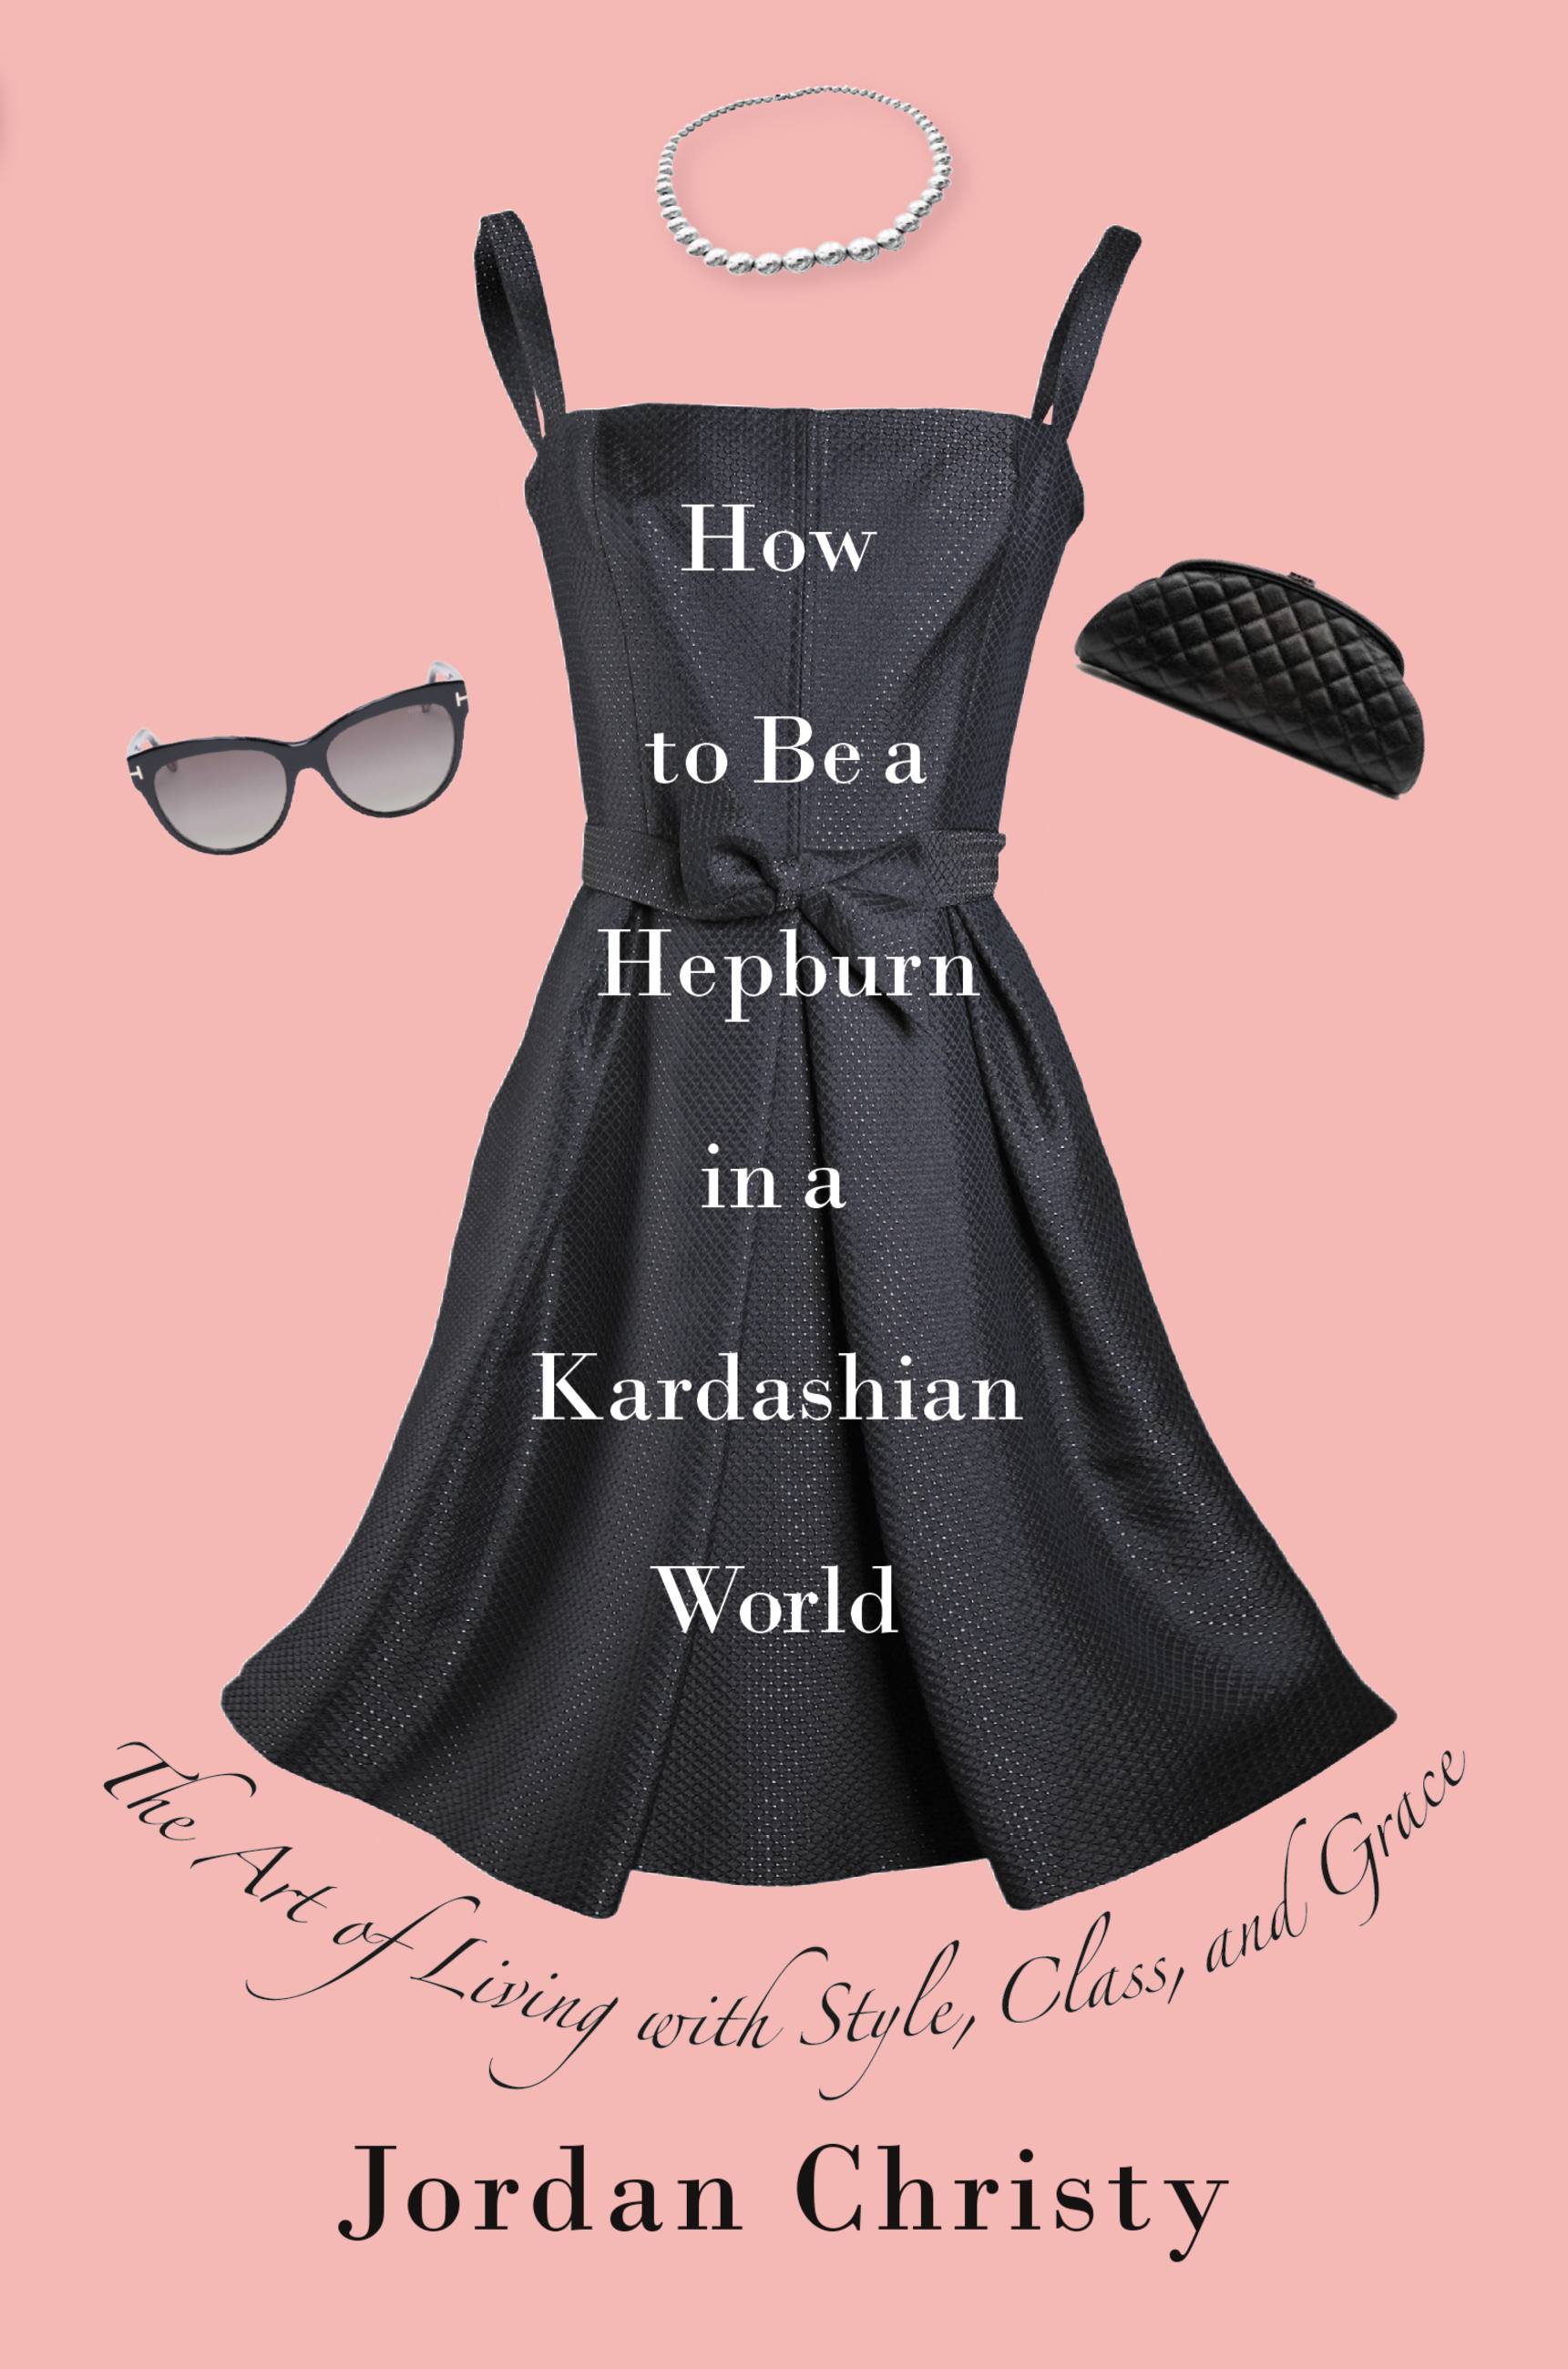 Image de couverture de How to Be a Hepburn in a Kardashian World [electronic resource] : The Art of Living with Style, Class, and Grace